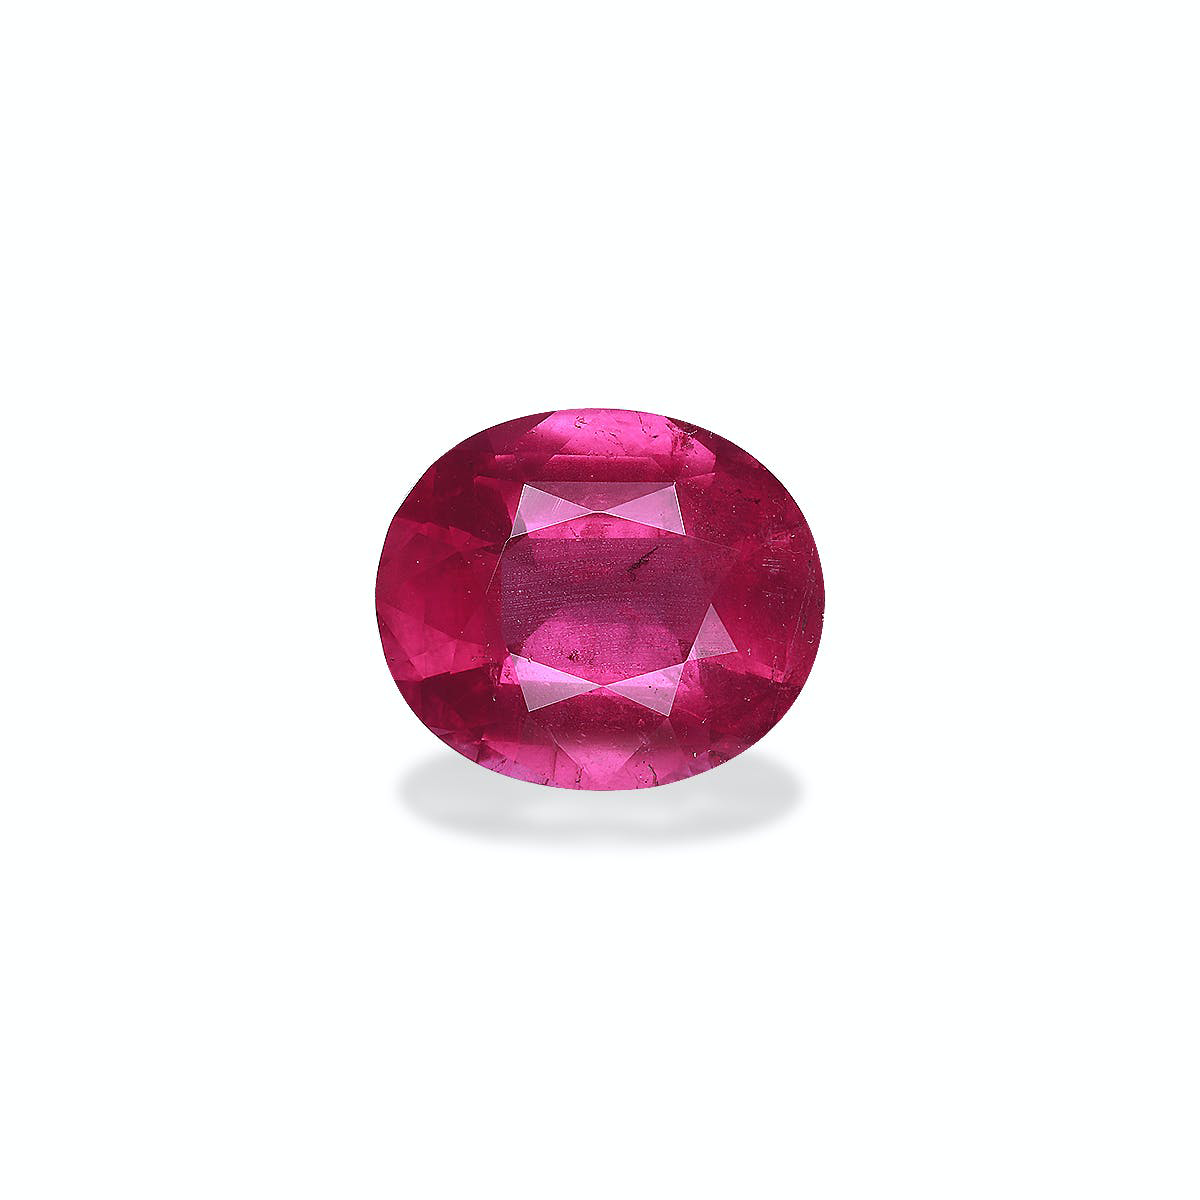 Picture of Red Rubellite Tourmaline 5.57ct - 13x11mm (RL0253)